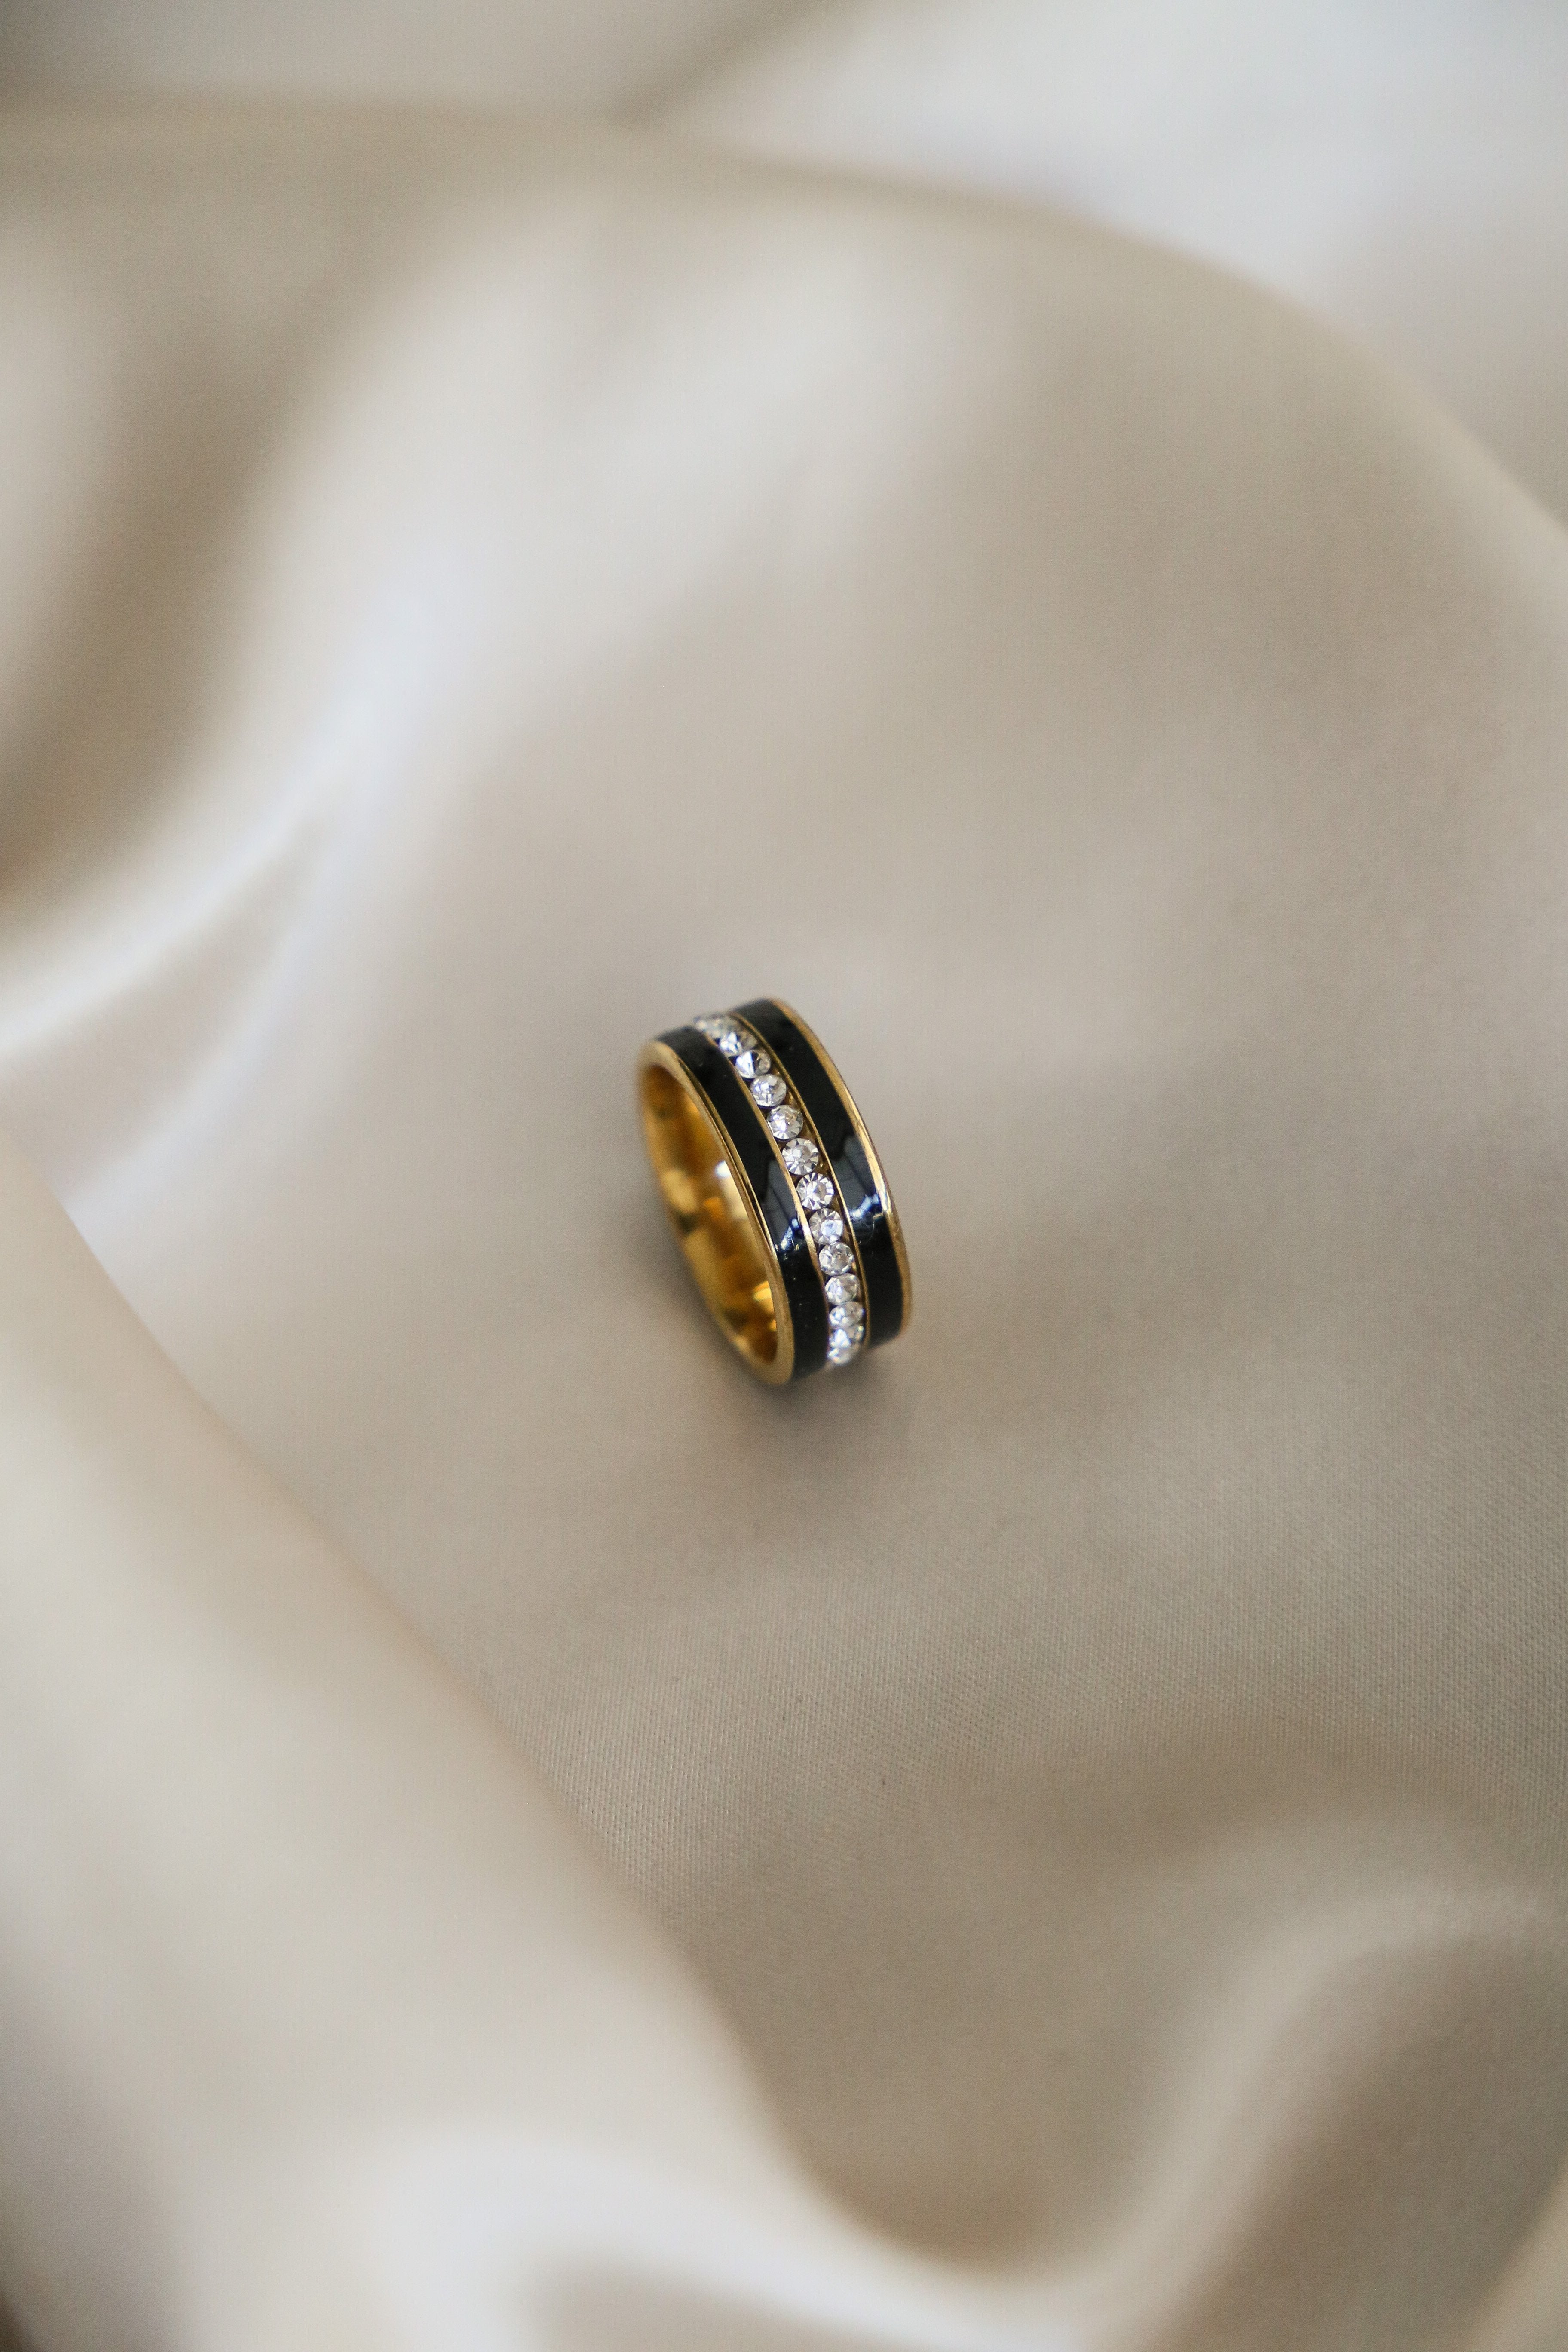 Salento Ring - Black - Boutique Minimaliste has waterproof, durable, elegant and vintage inspired jewelry